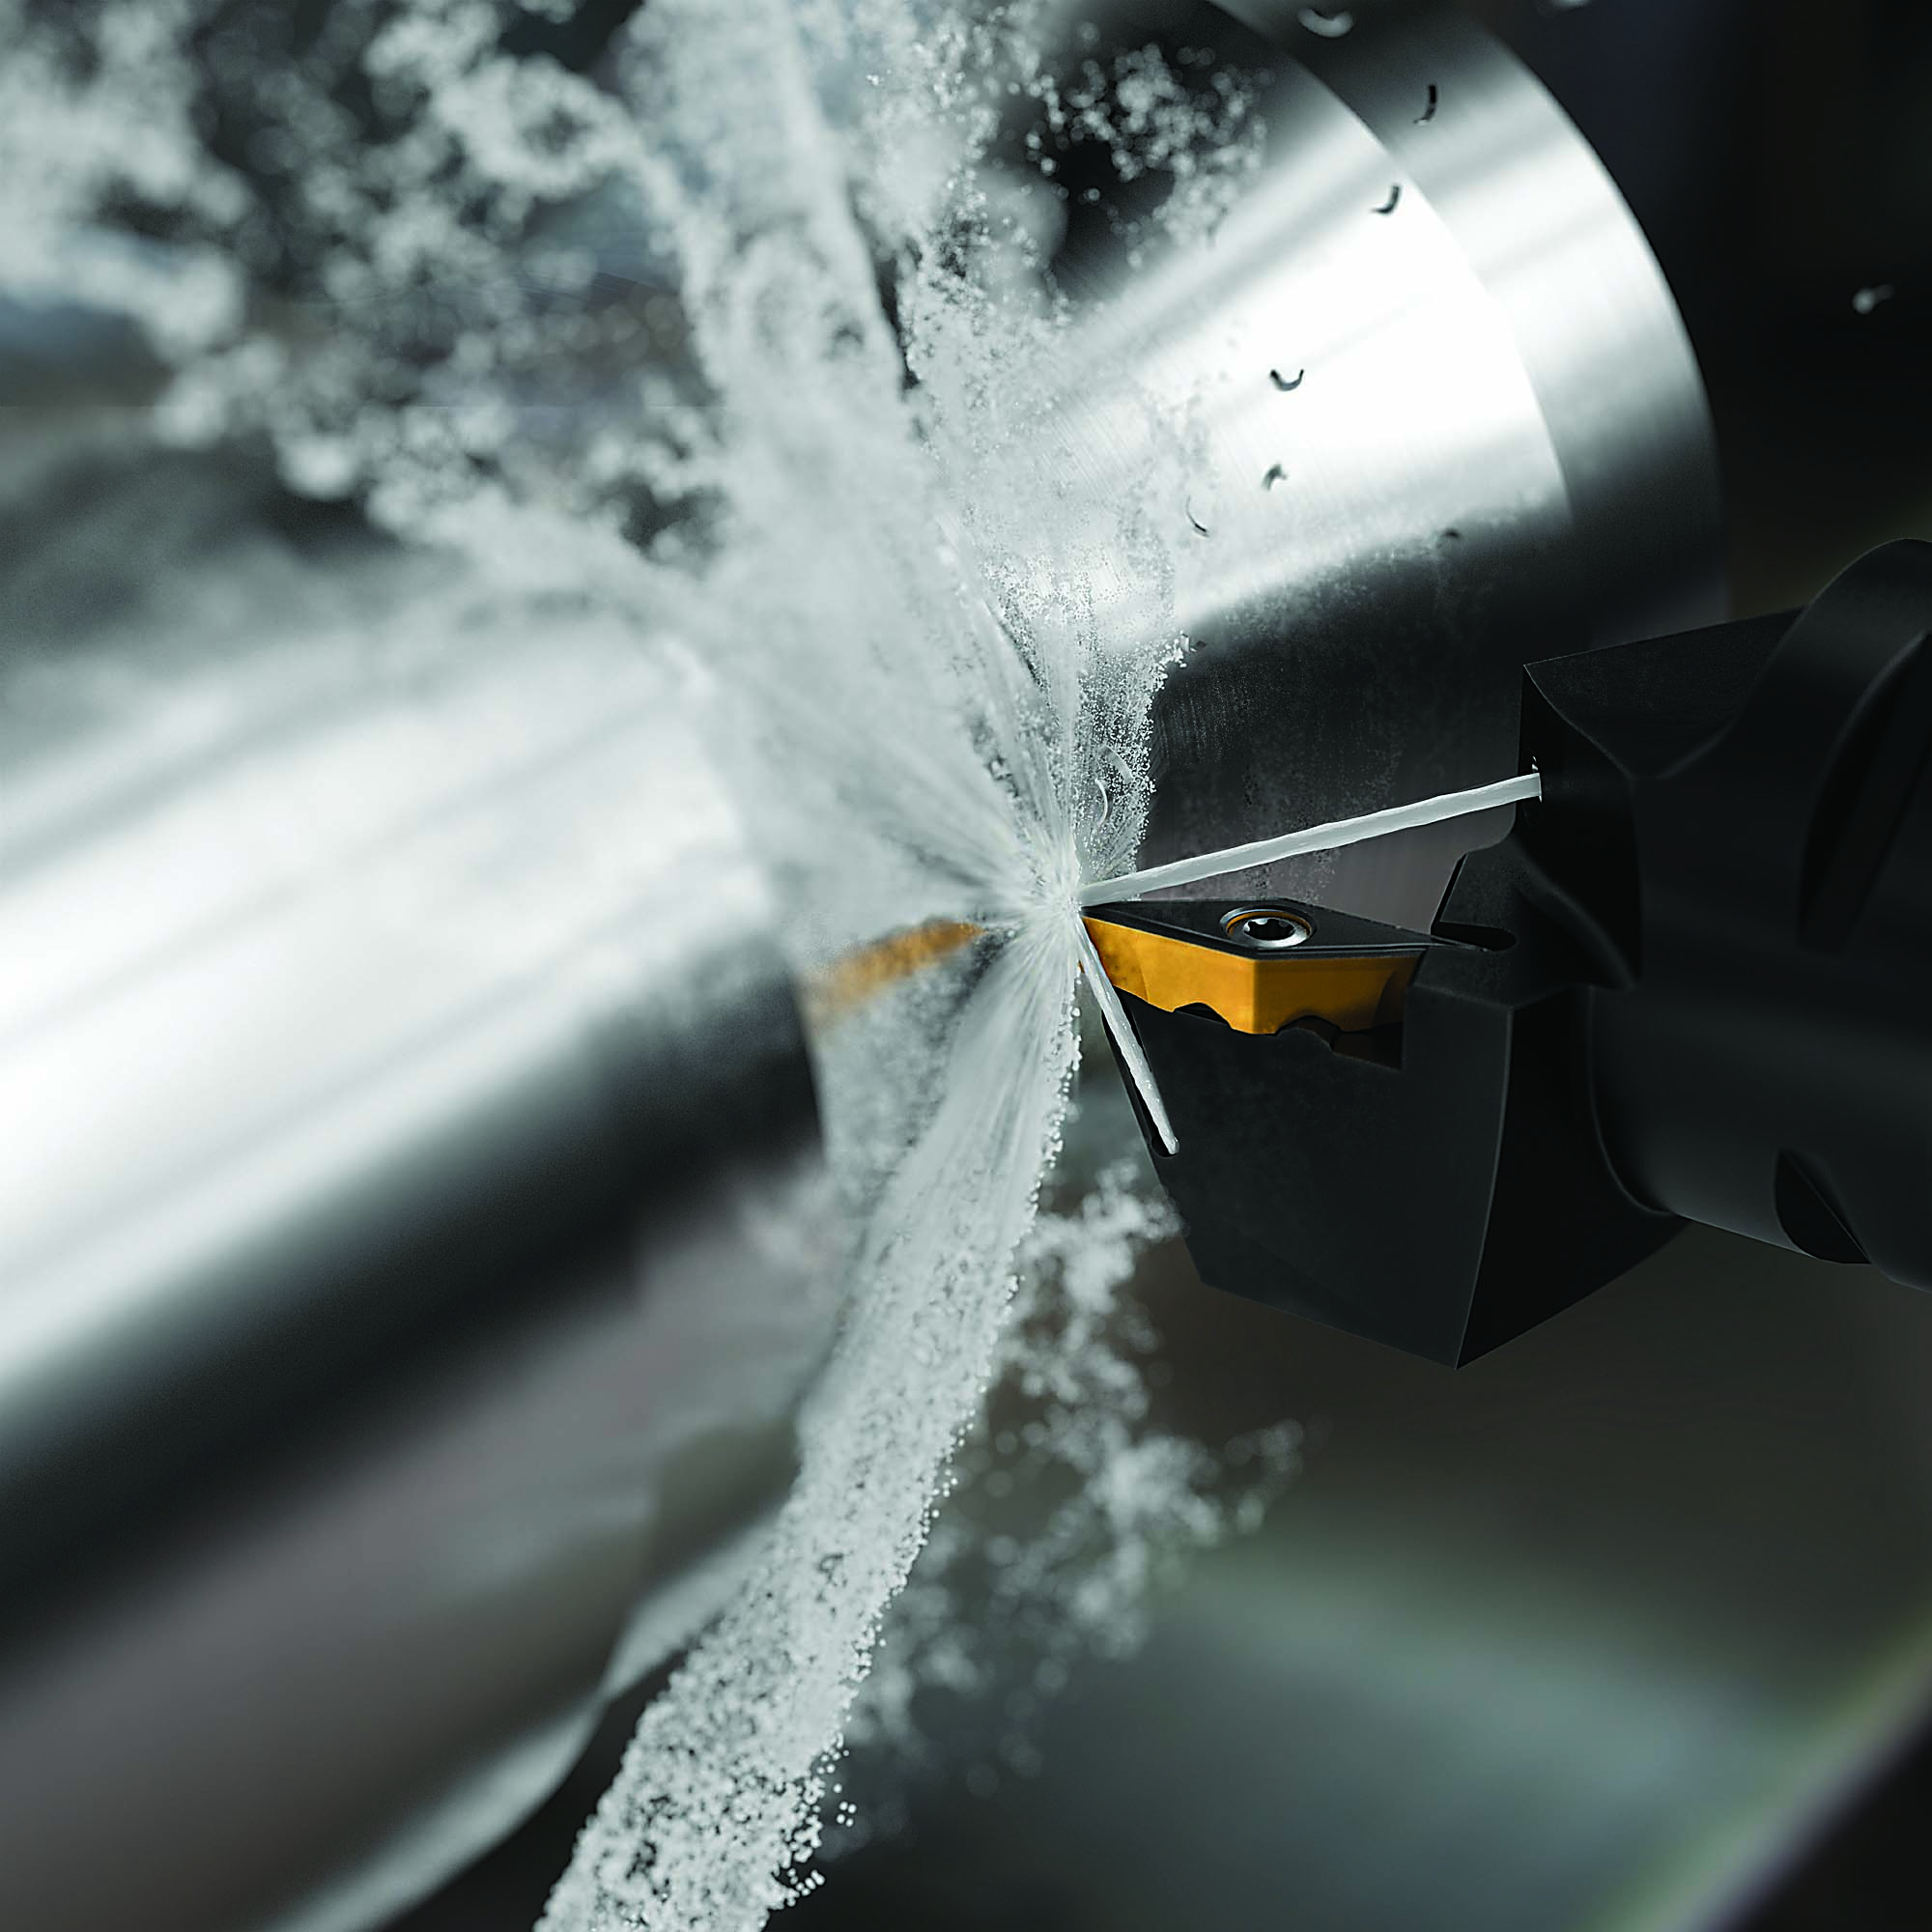 With advances in quick-change design, toolholders can use high-pressure jets to deliver coolant, which not only cools the cutting tip but helps break chips and improve chip evacuation.